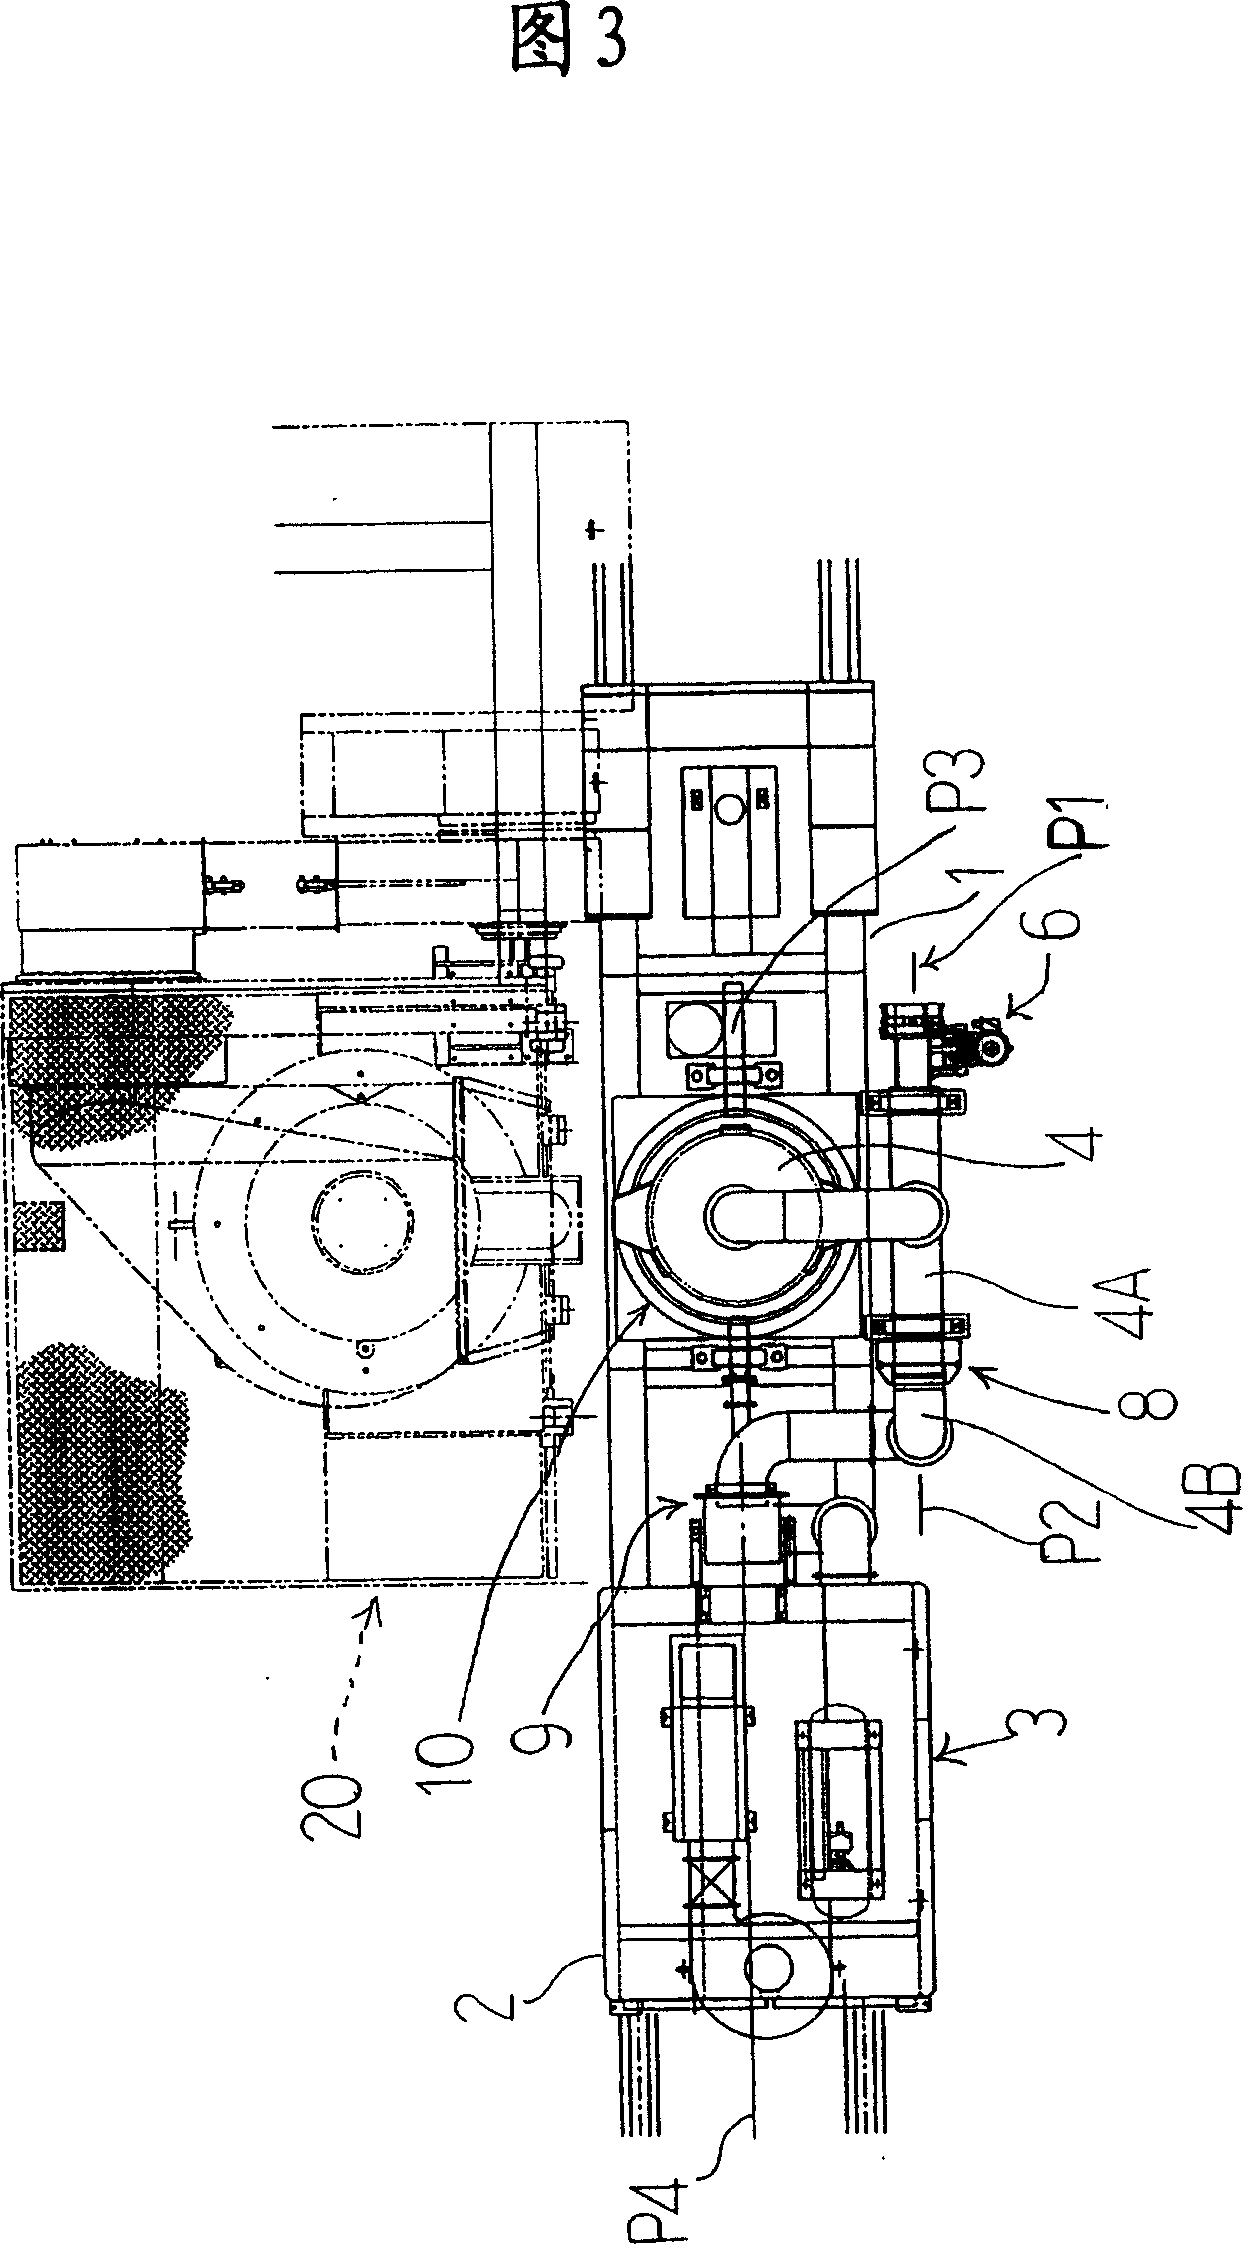 Molten metal carrying apparatus using ladle